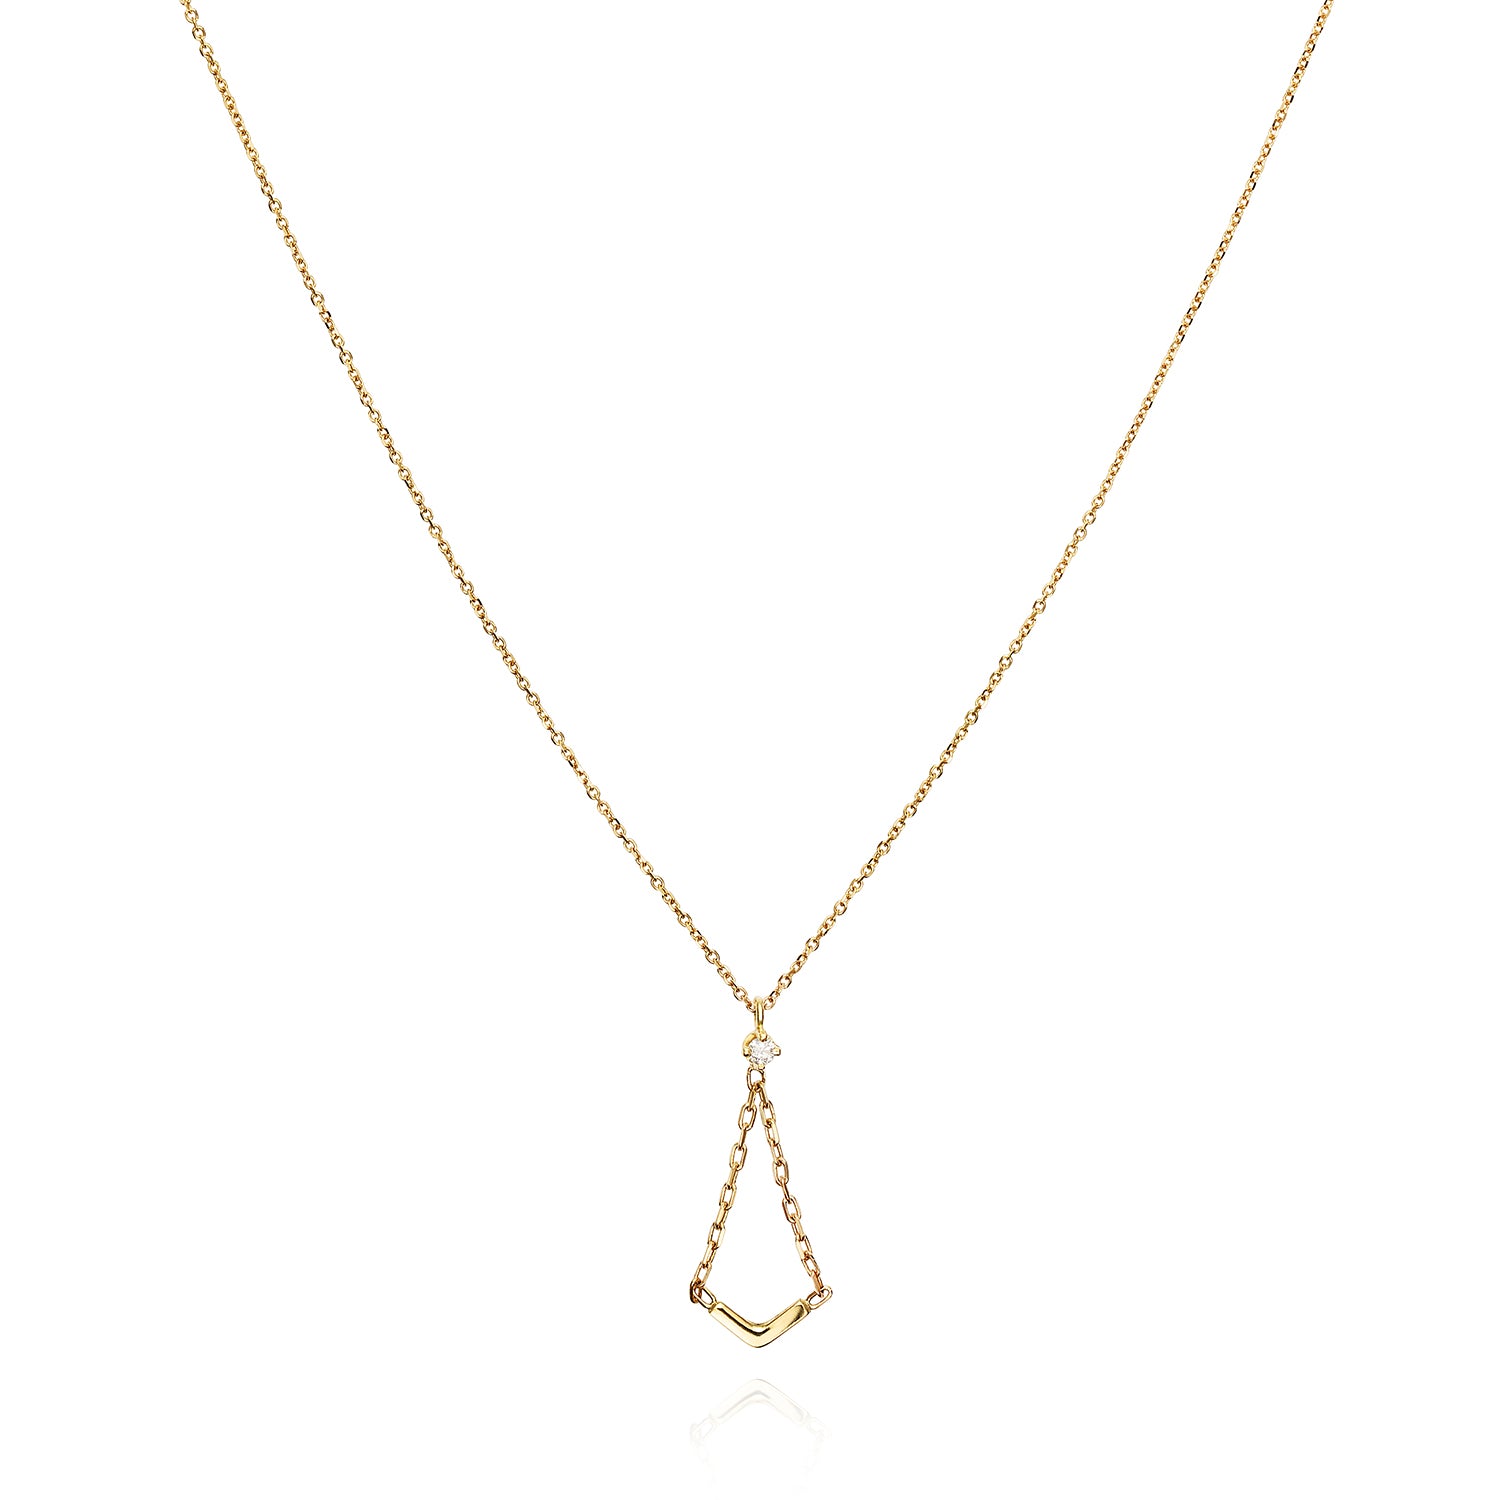 18ct yellow gold necklace with diamond and small V-shaped charm 